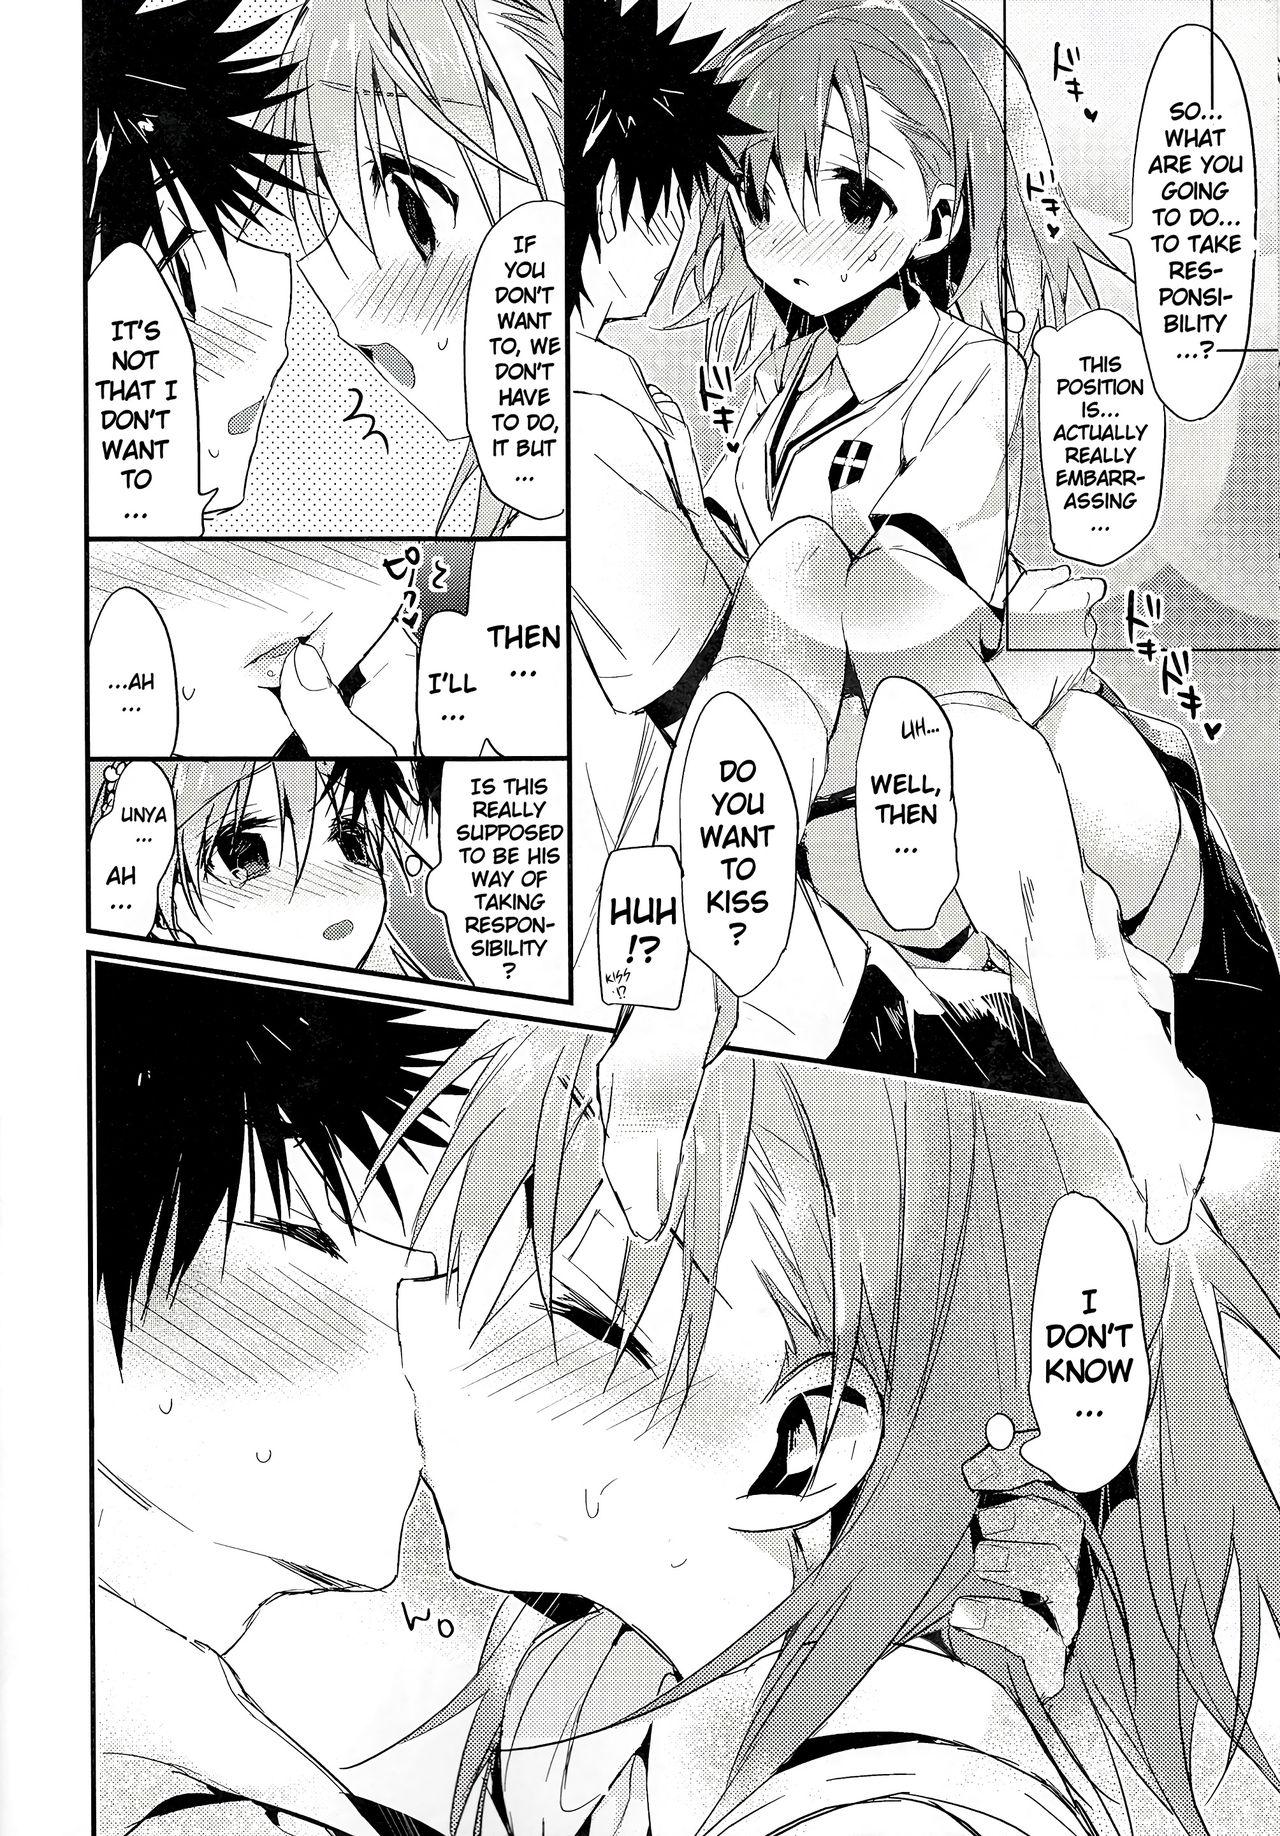 Pantyhose Mikoto to. 5 | With Mikoto. 5 - Toaru majutsu no index | a certain magical index Officesex - Page 12